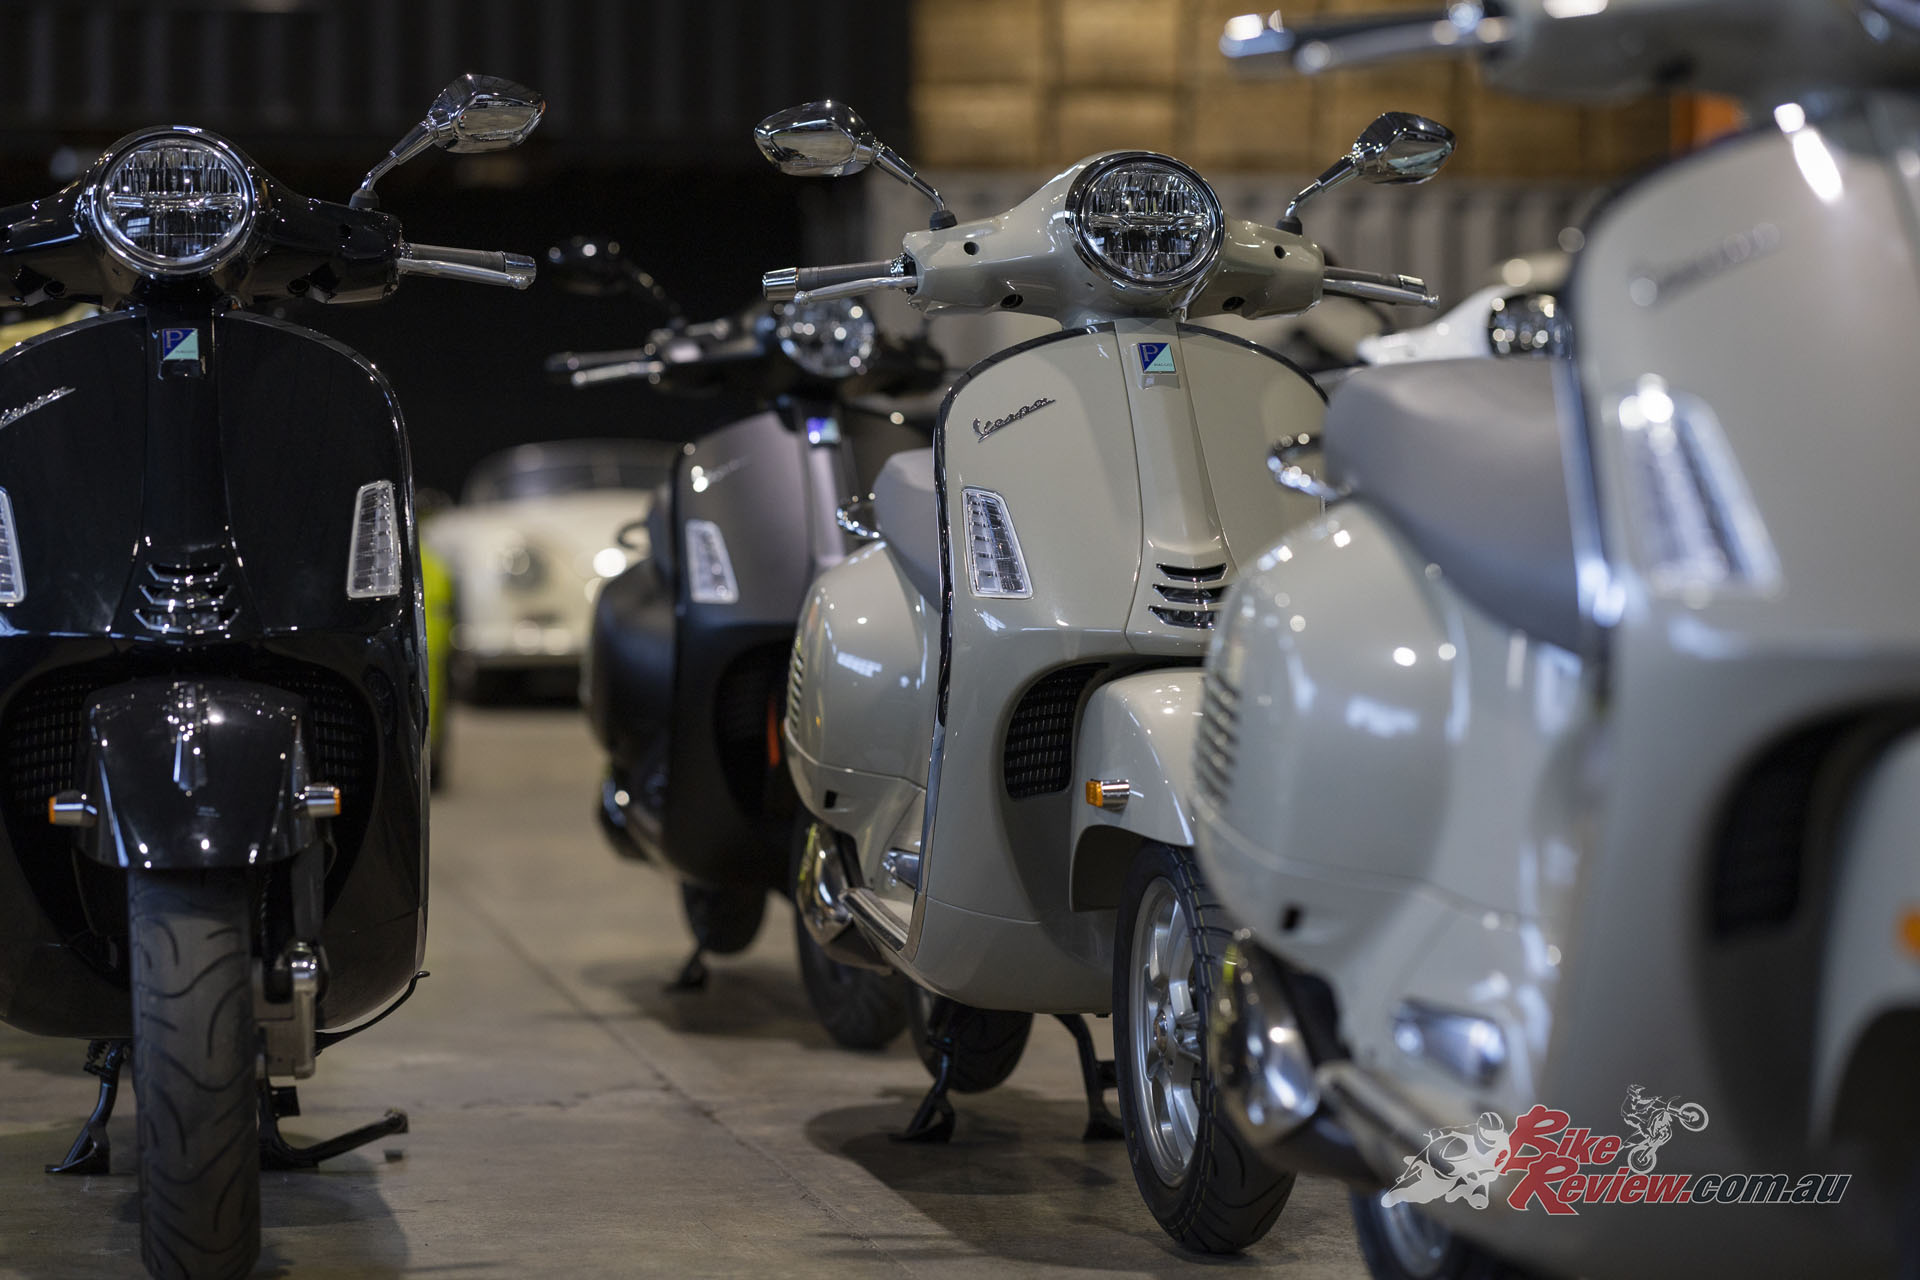 The new Vespa GTS is a looker, plenty of colours to choose from and a no-frills approach to ensure you’re getting a proper looking Vespa.